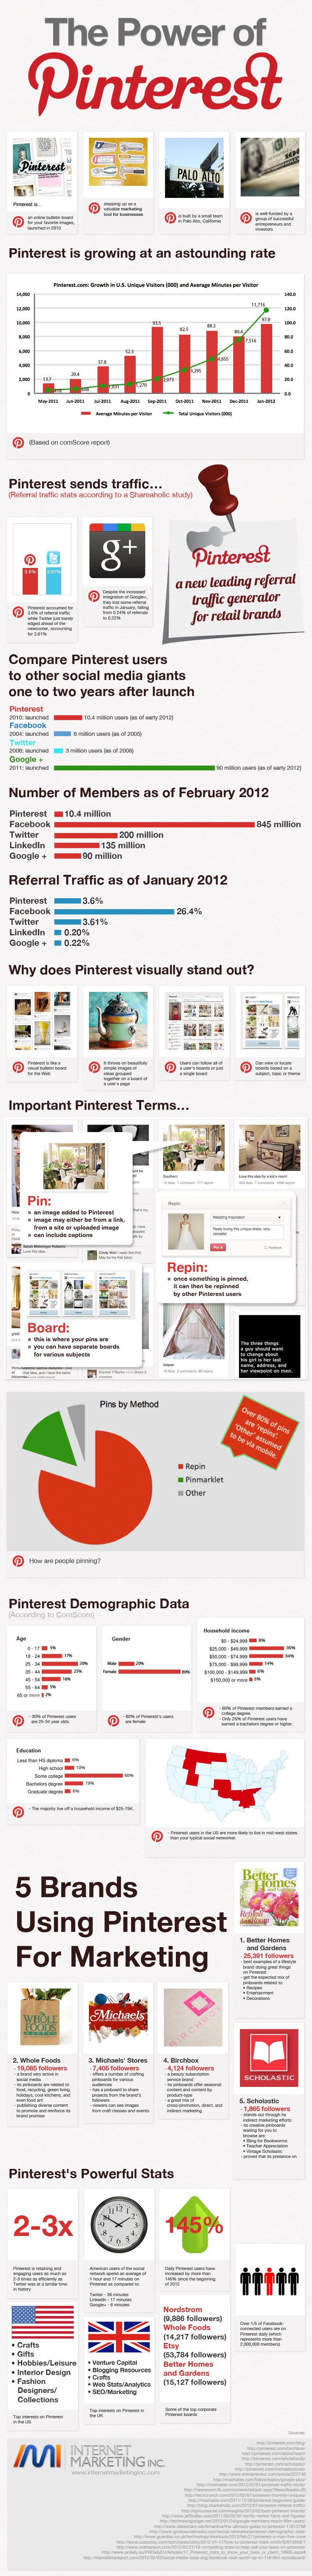 the-power-of-pinterest-infographic1